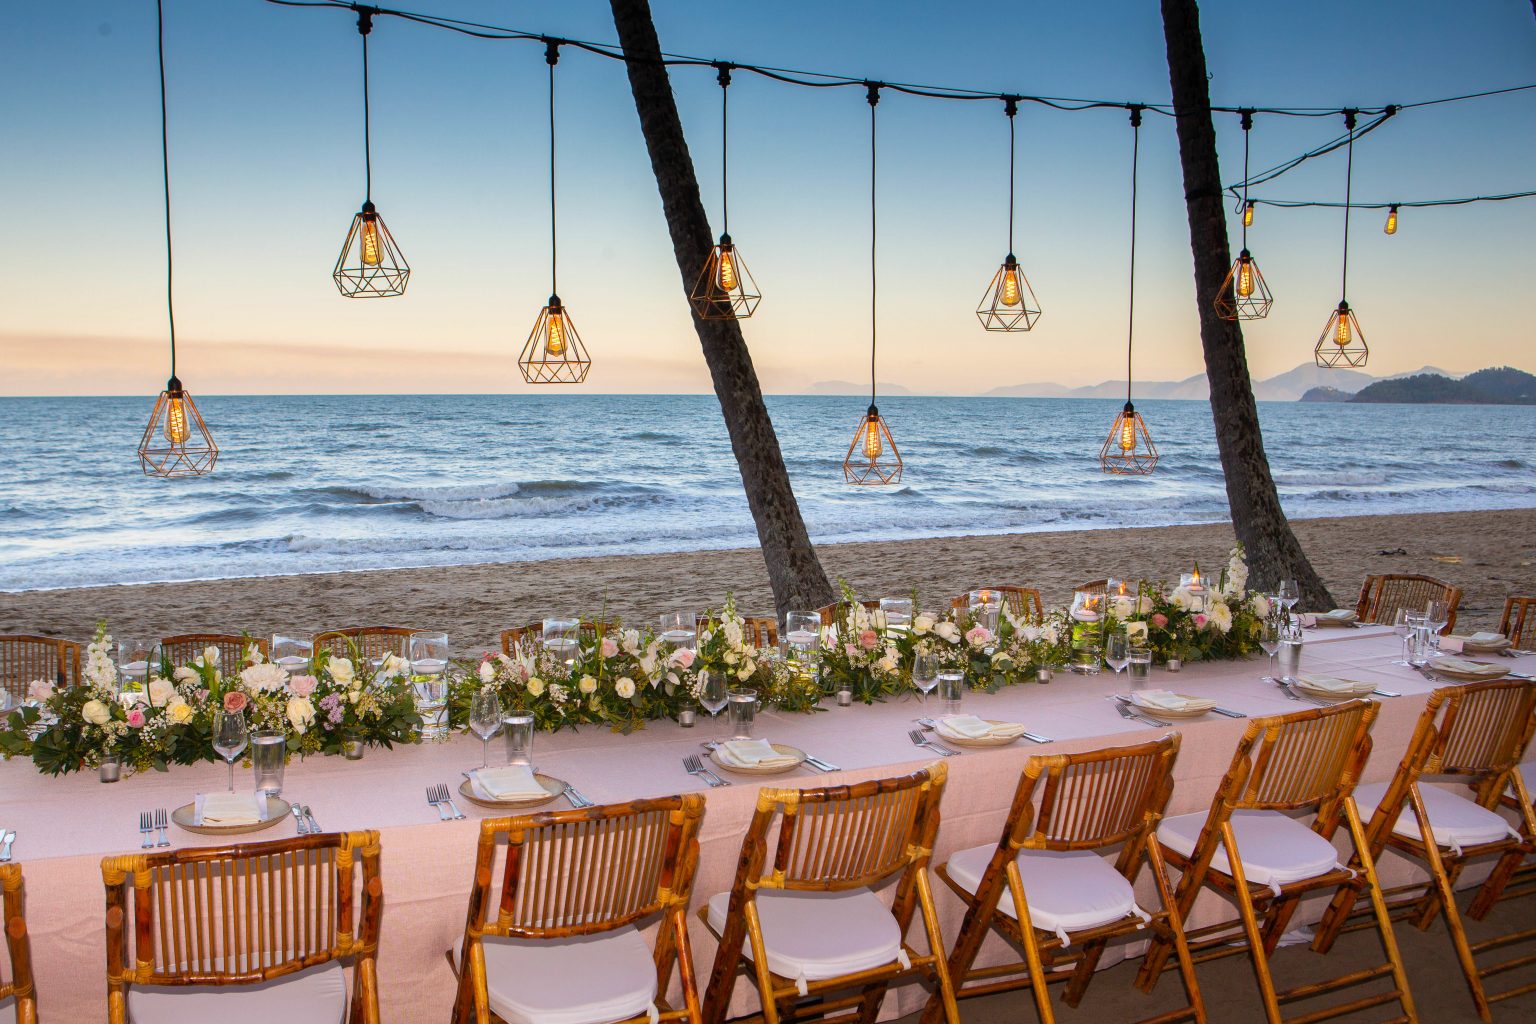 Melaleuca Resort - Palm cove weddings - Bridal table setup on the beach with beautiful flowers and cane chairs